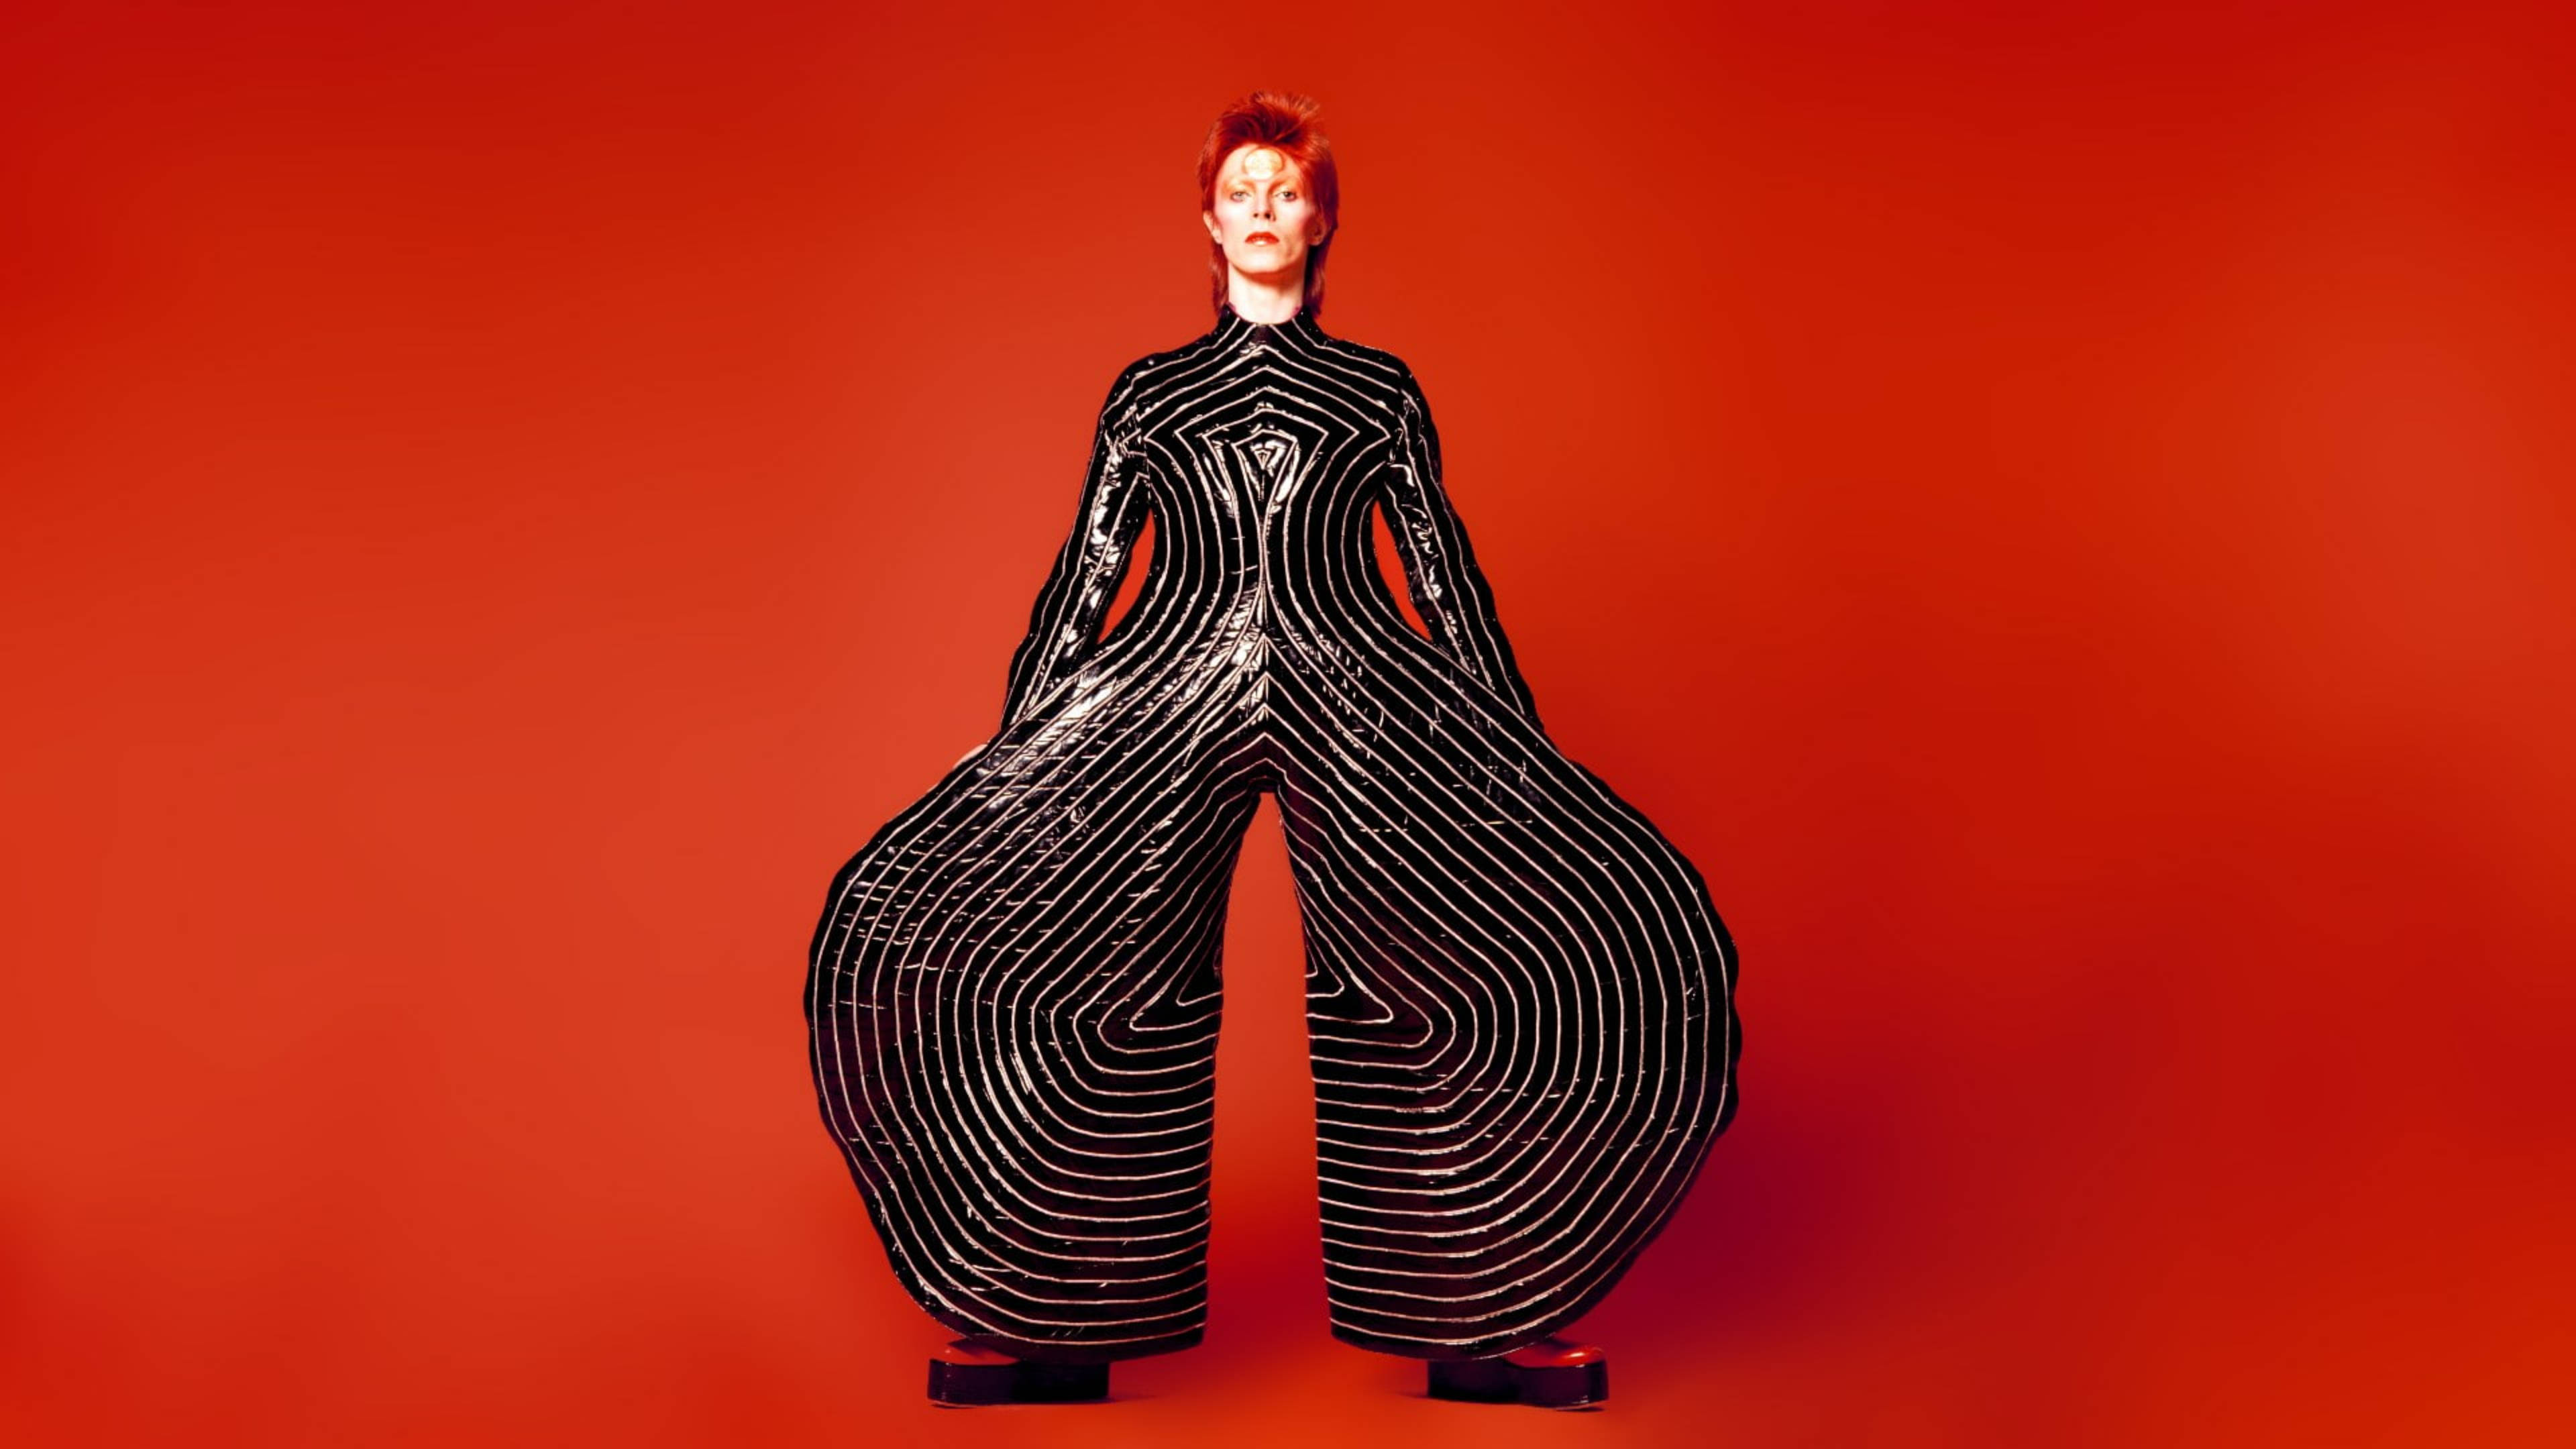 Download David Bowie Stripes In Red Wallpaper | Wallpapers.com